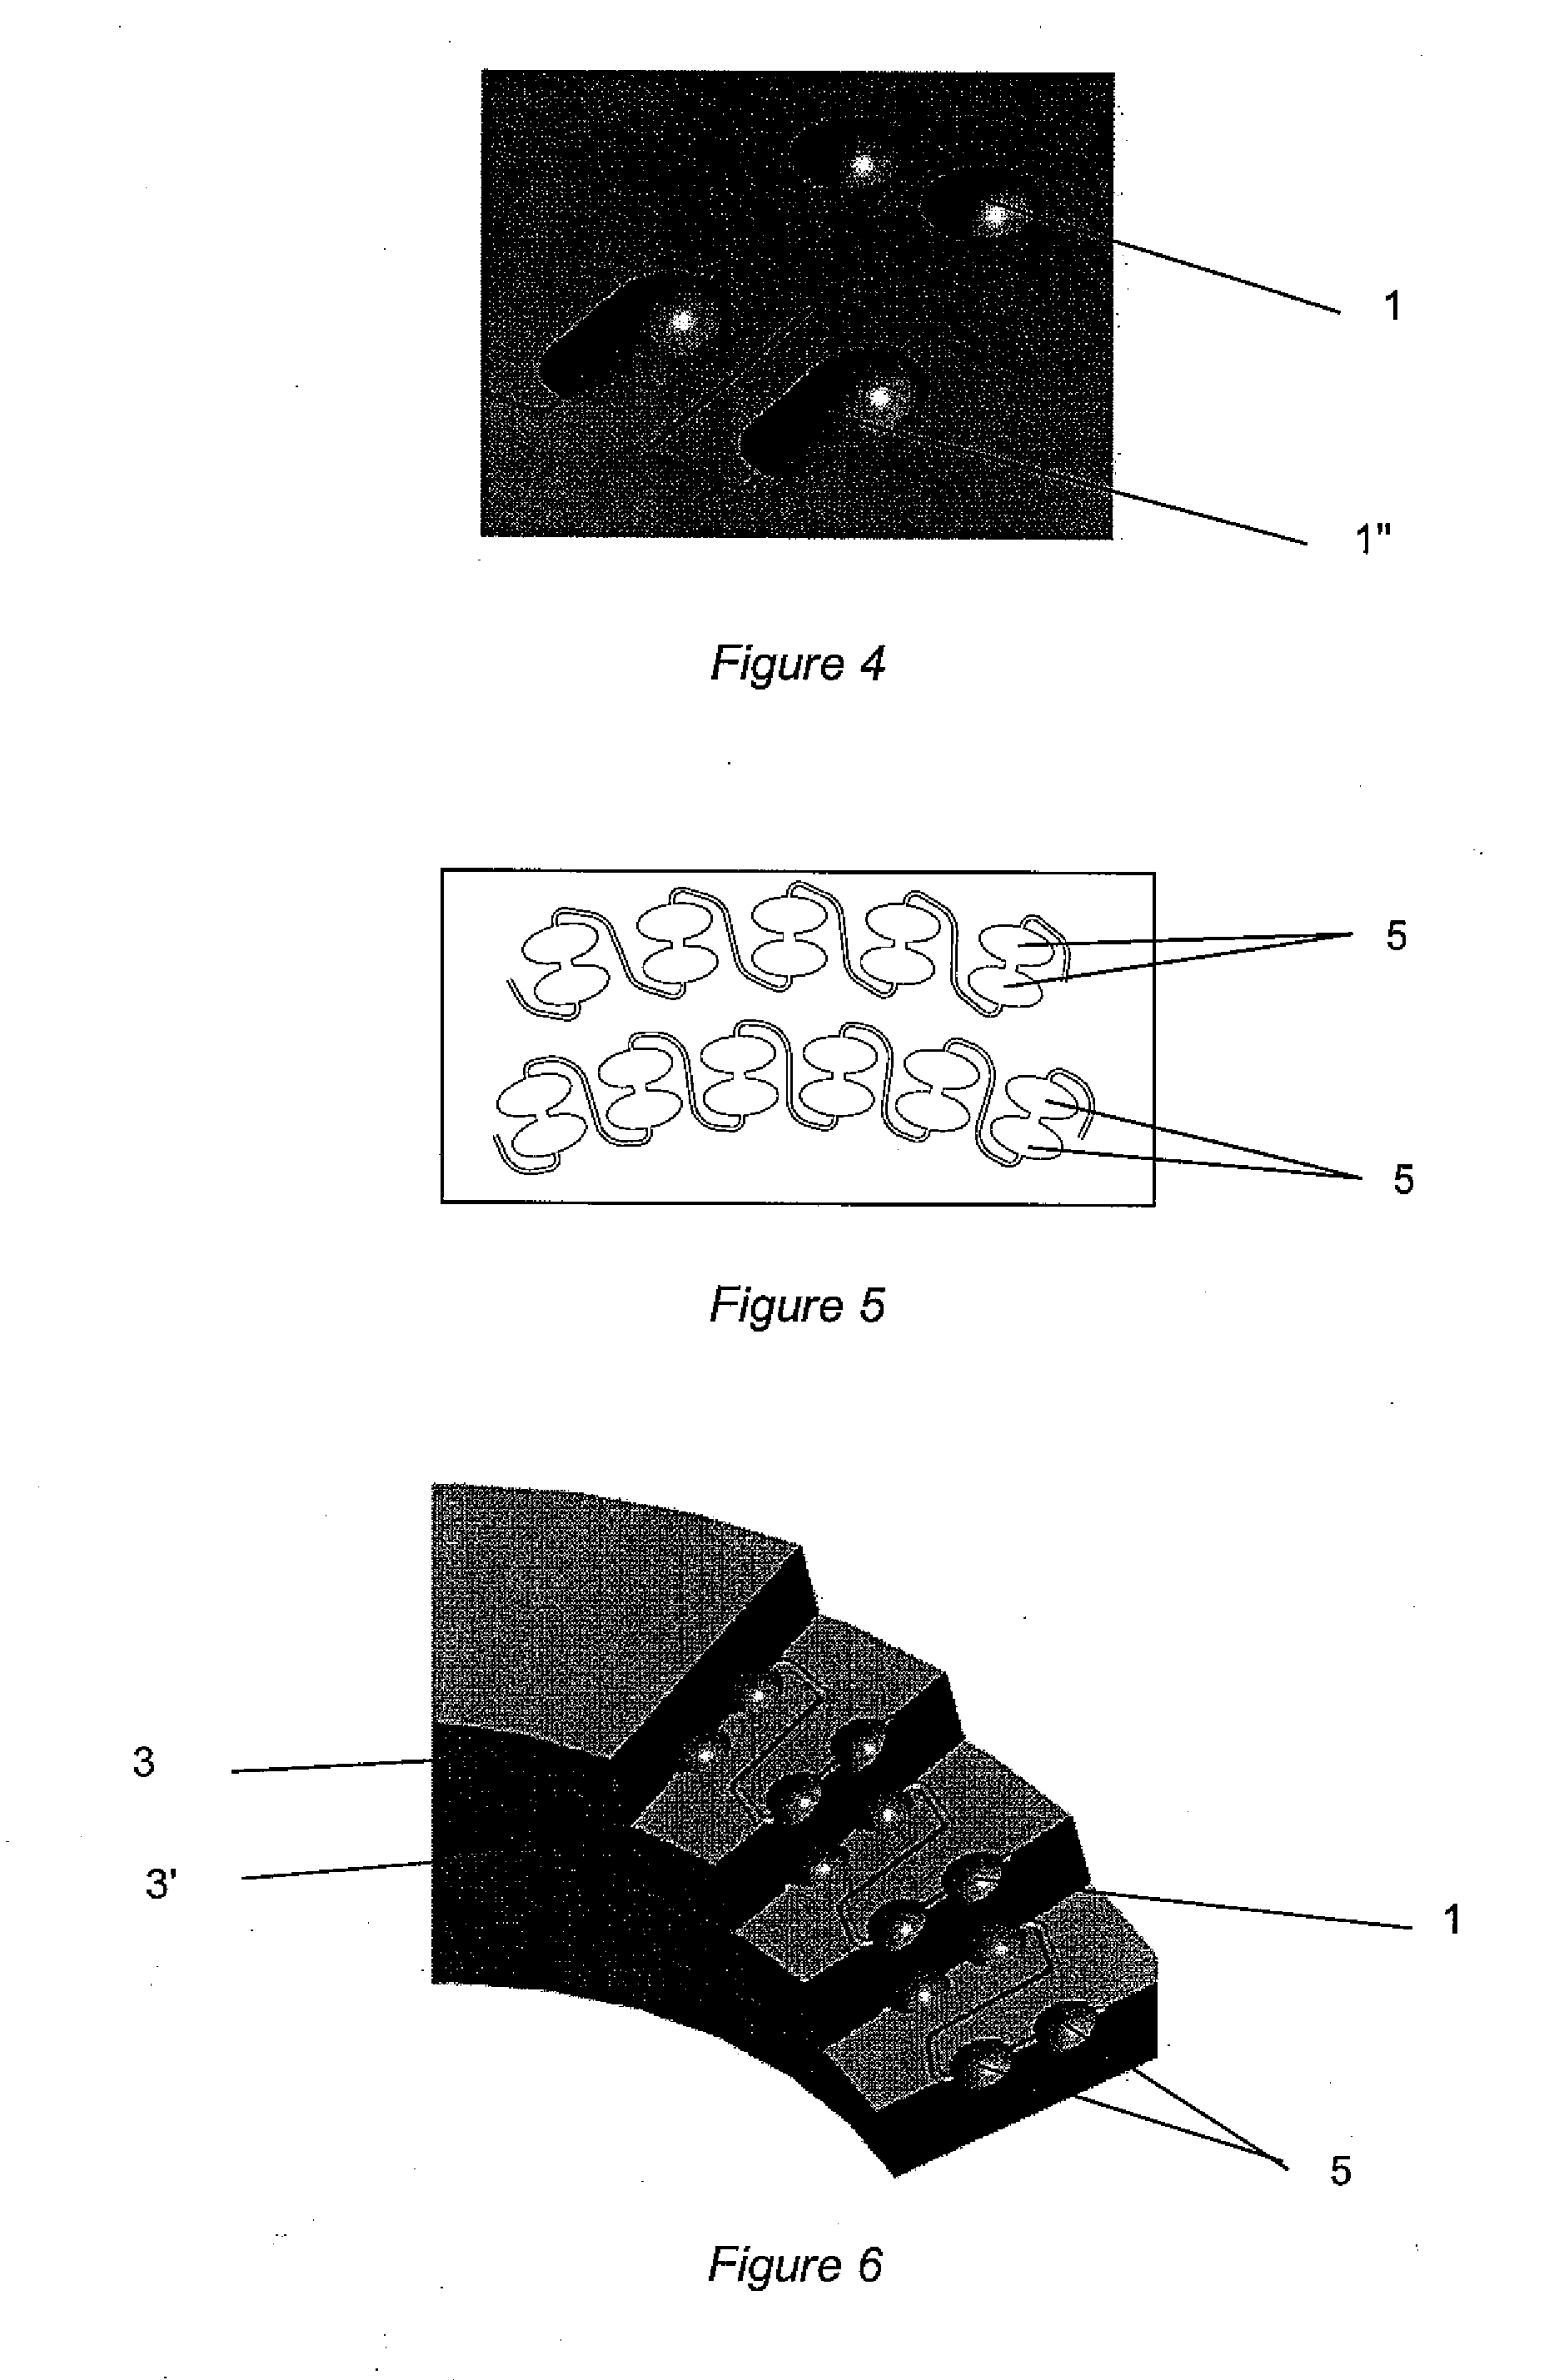 Cells and connecting channels for centrifugal partition chromatography devices